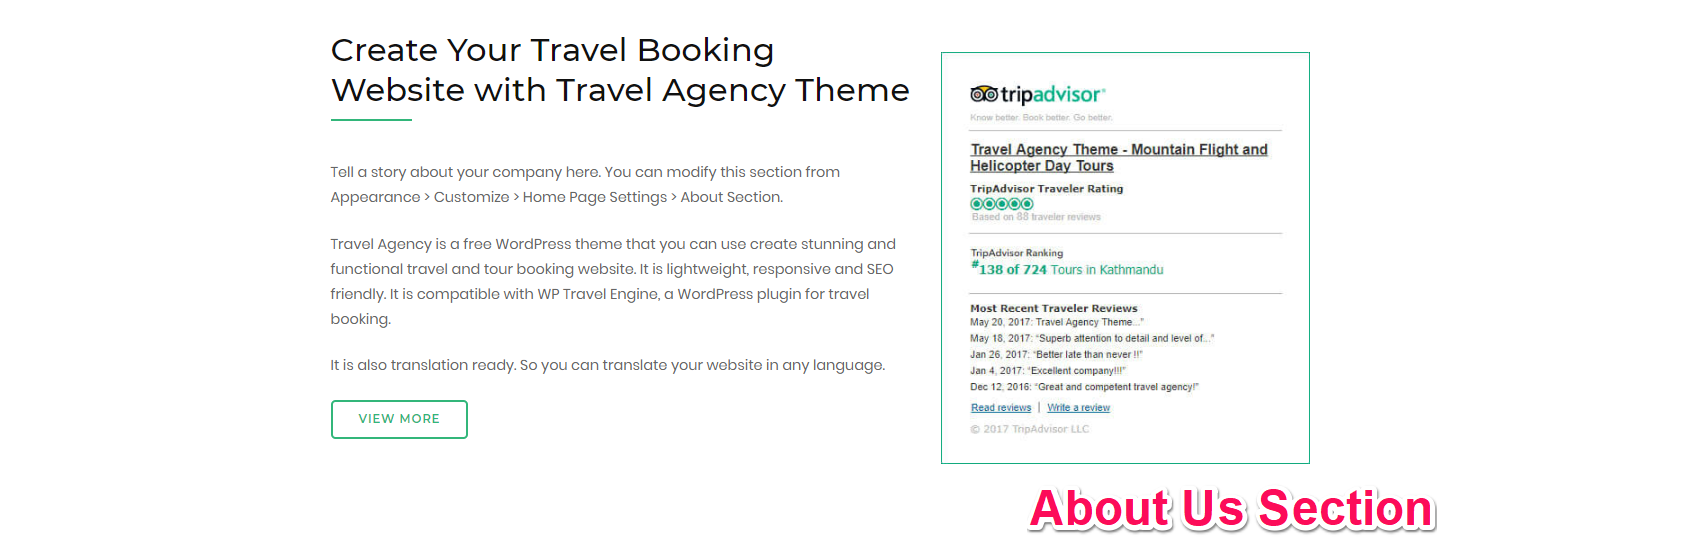 About Us Section travel agency